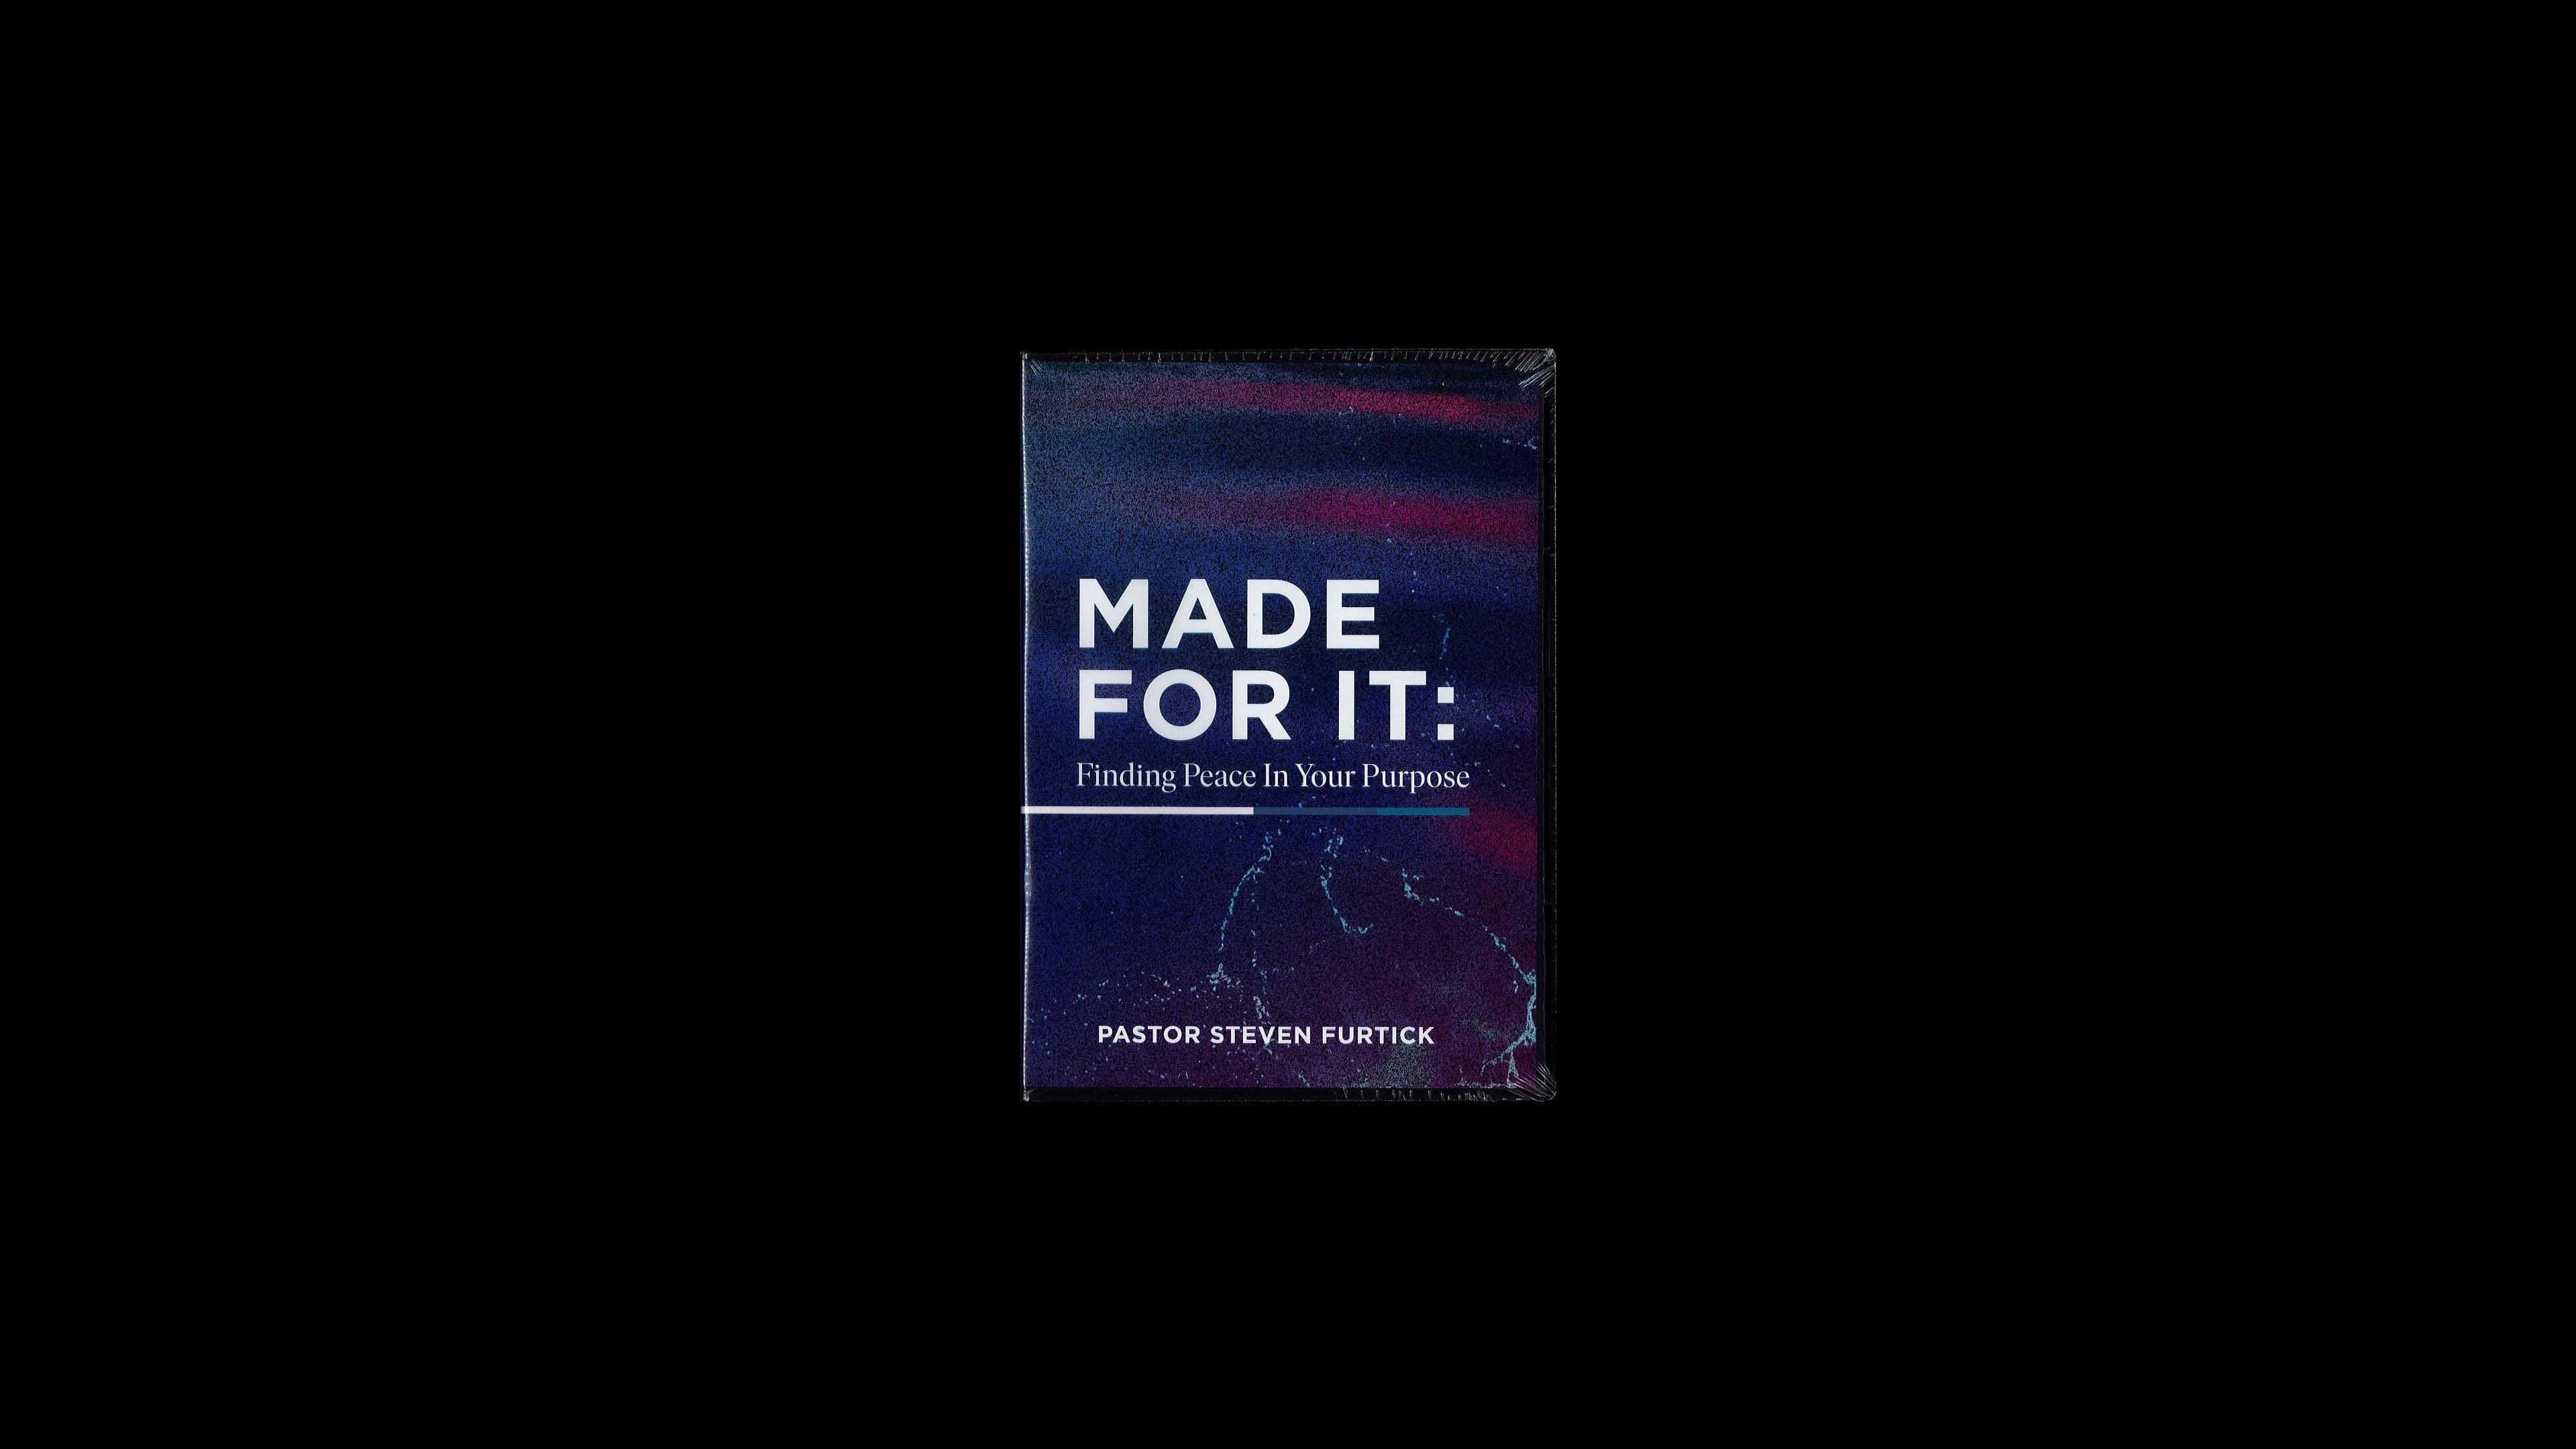 Made For It DVD Image